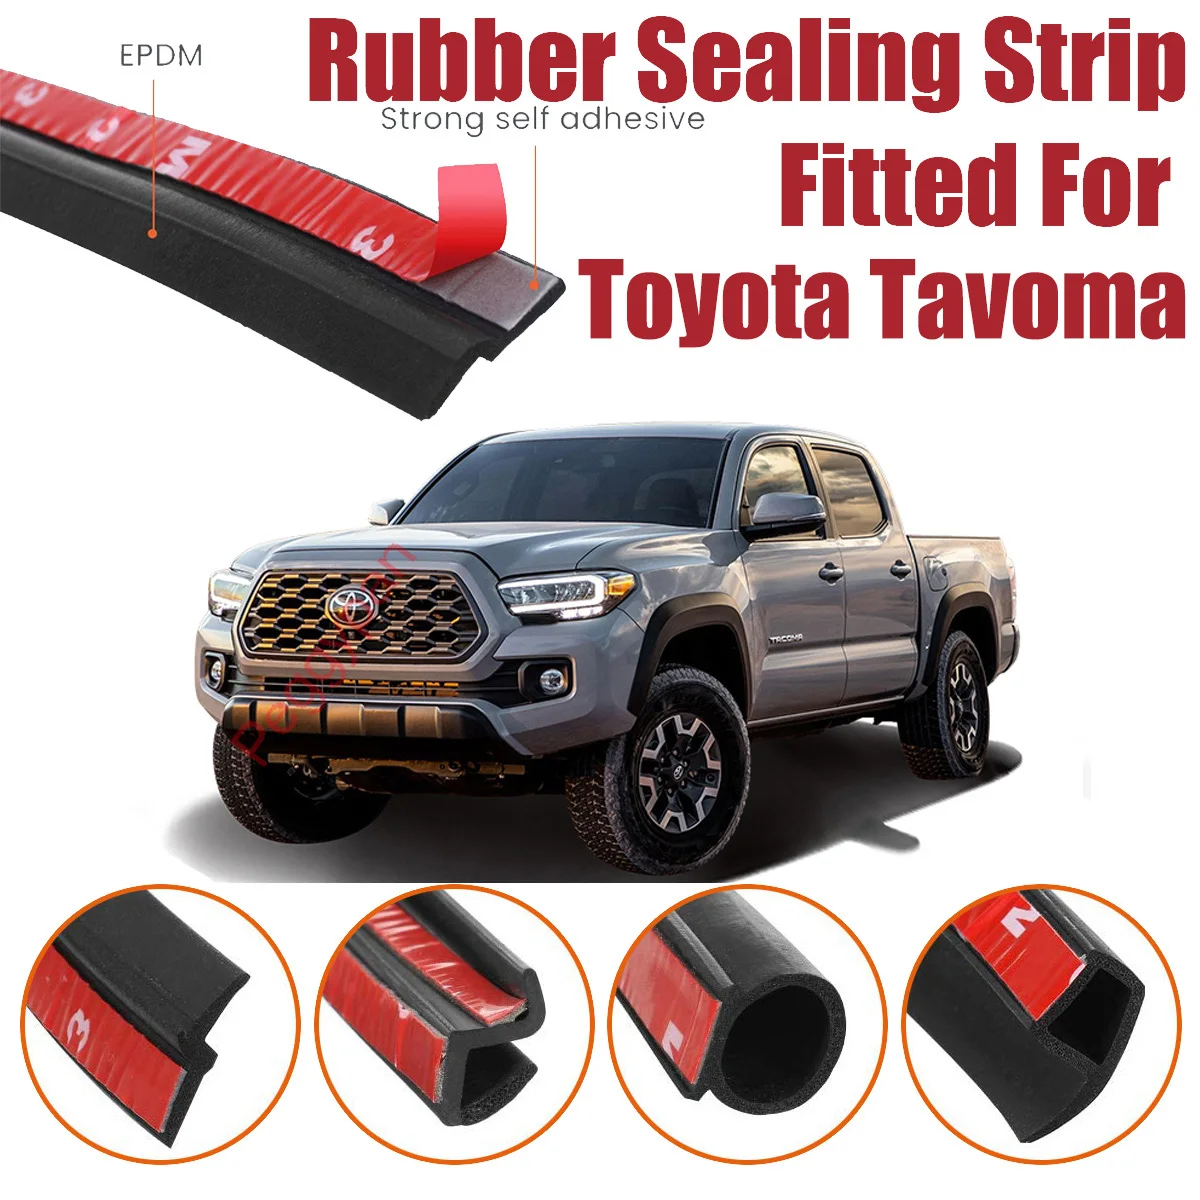 Door Seal Strip Kit Self Adhesive Window Engine Cover Soundproof Rubber Weather Draft Wind Noise Reduction For Toyota Tacoma